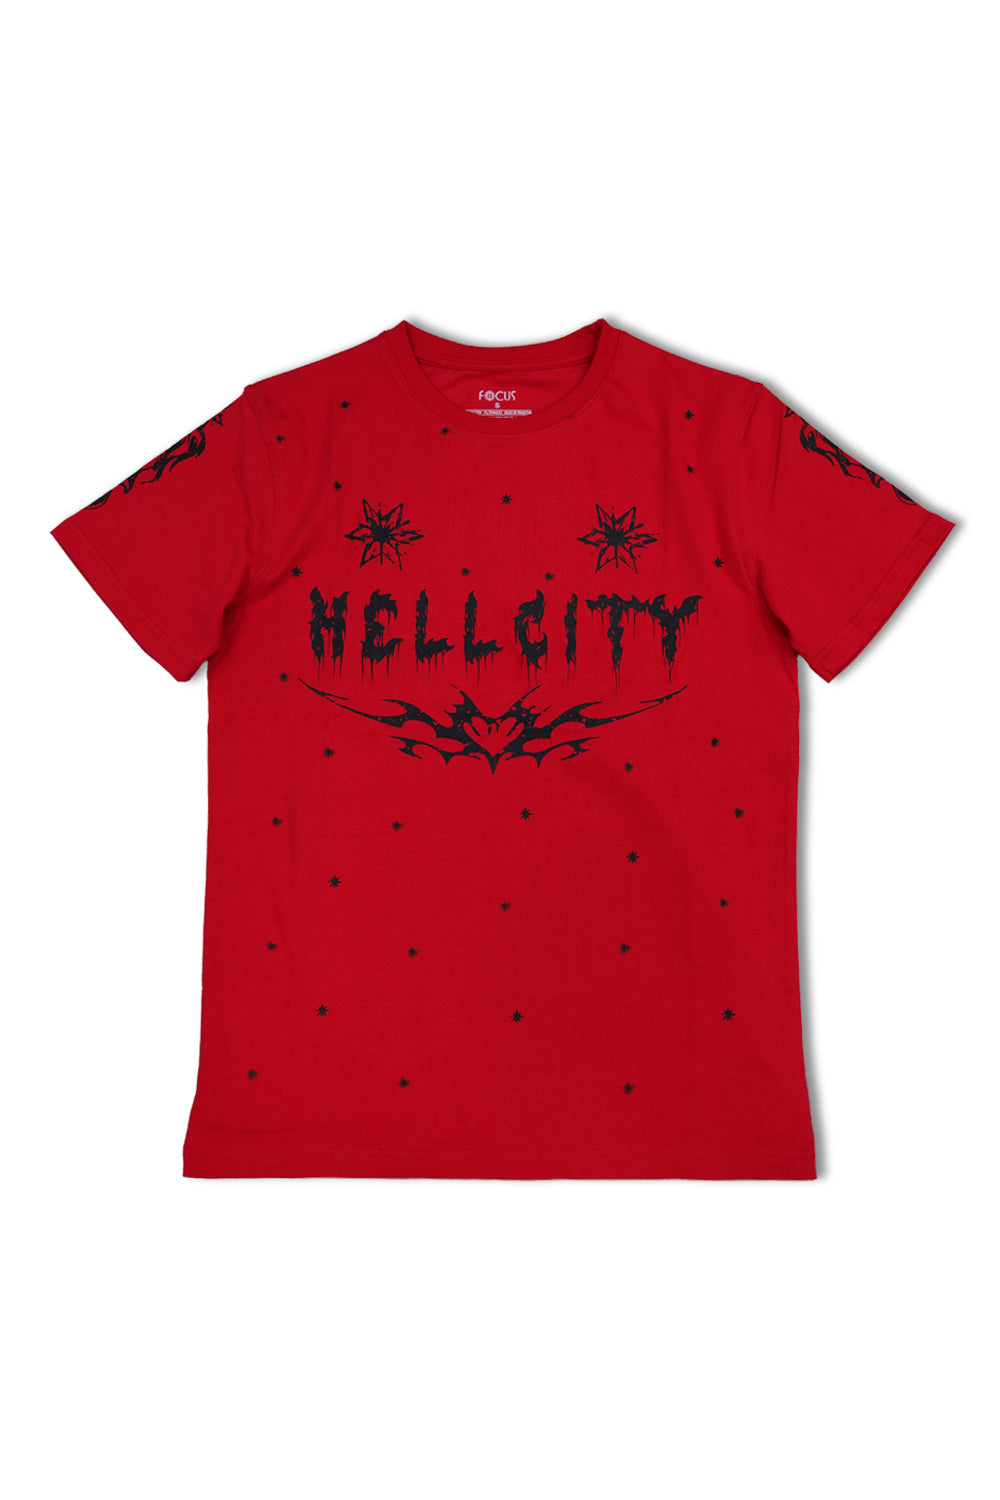 Focus Red Hell City Tee 